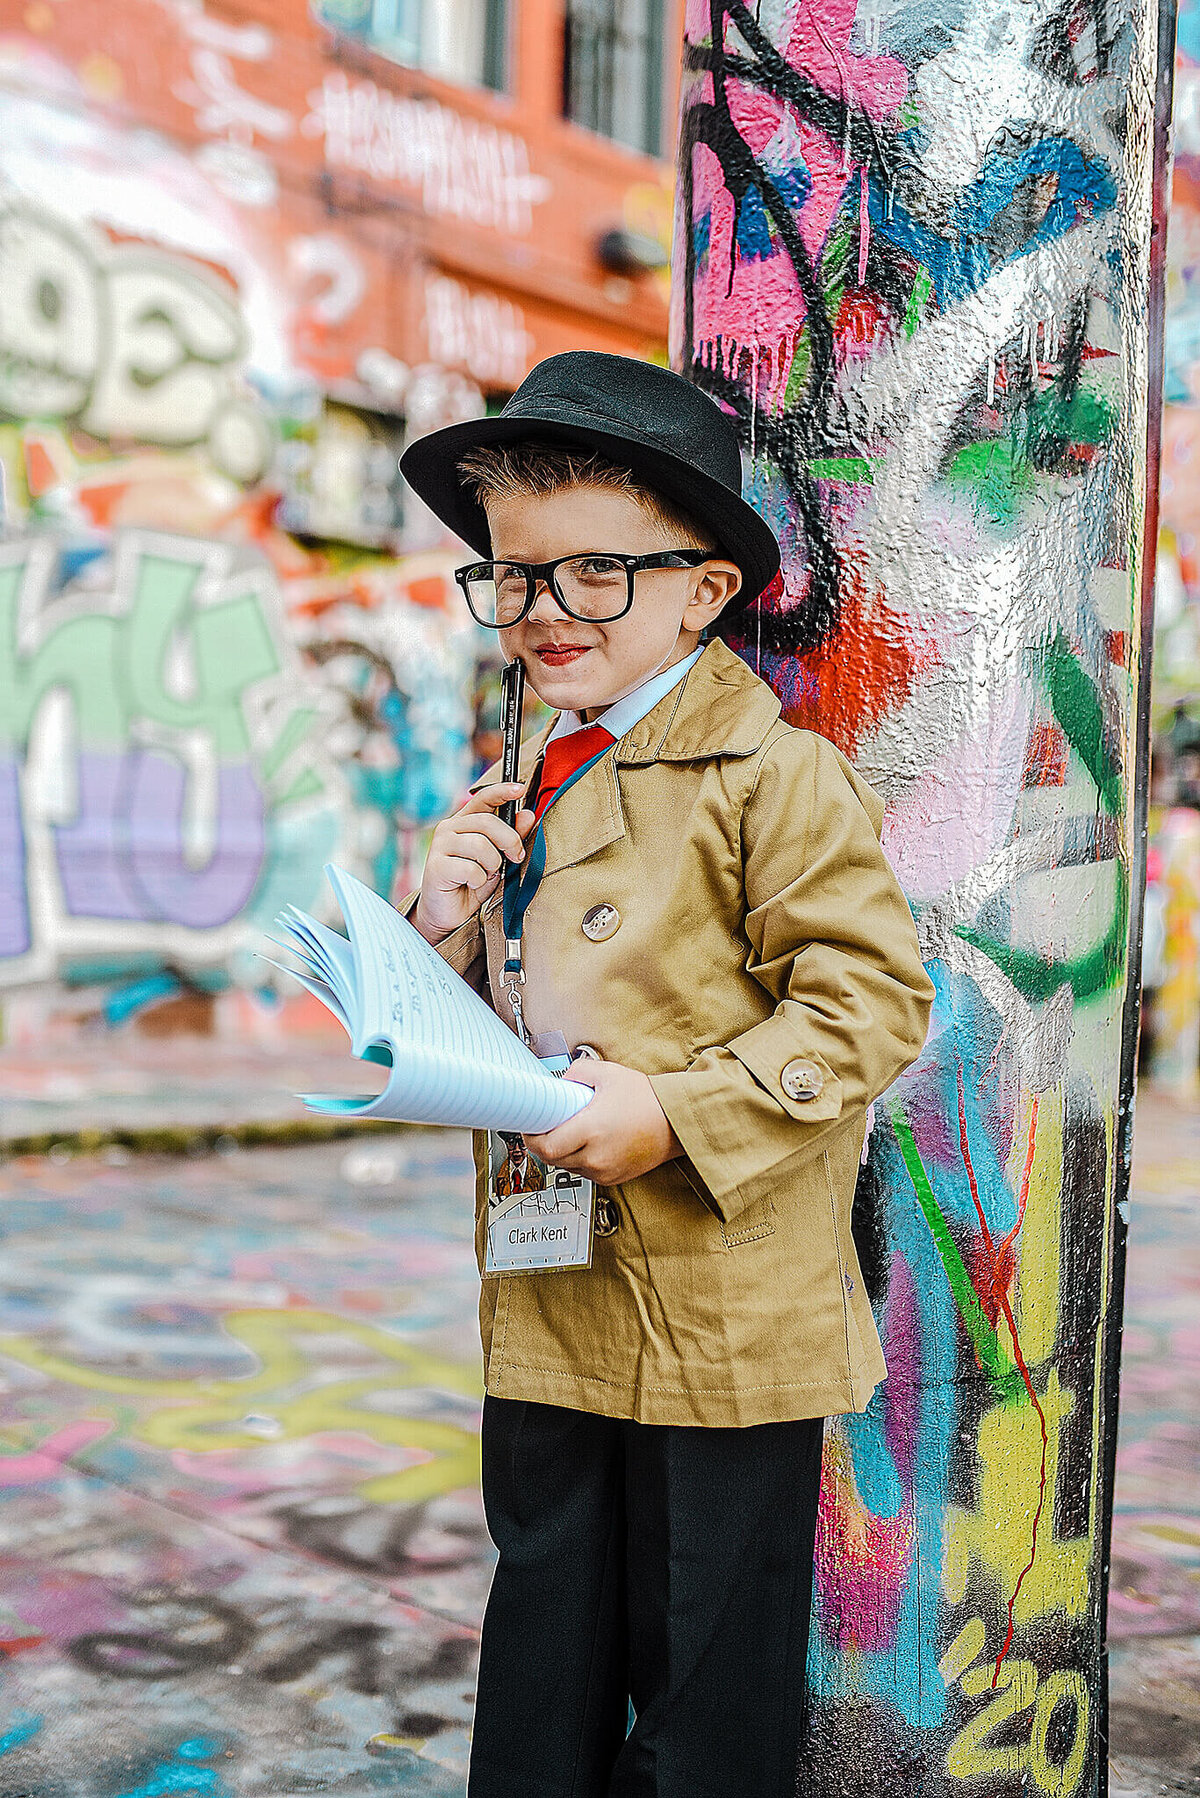 Little boy with black fedora hat holding a pen in a trench coat at graffiti alley in Baltimore Maryland near MICA